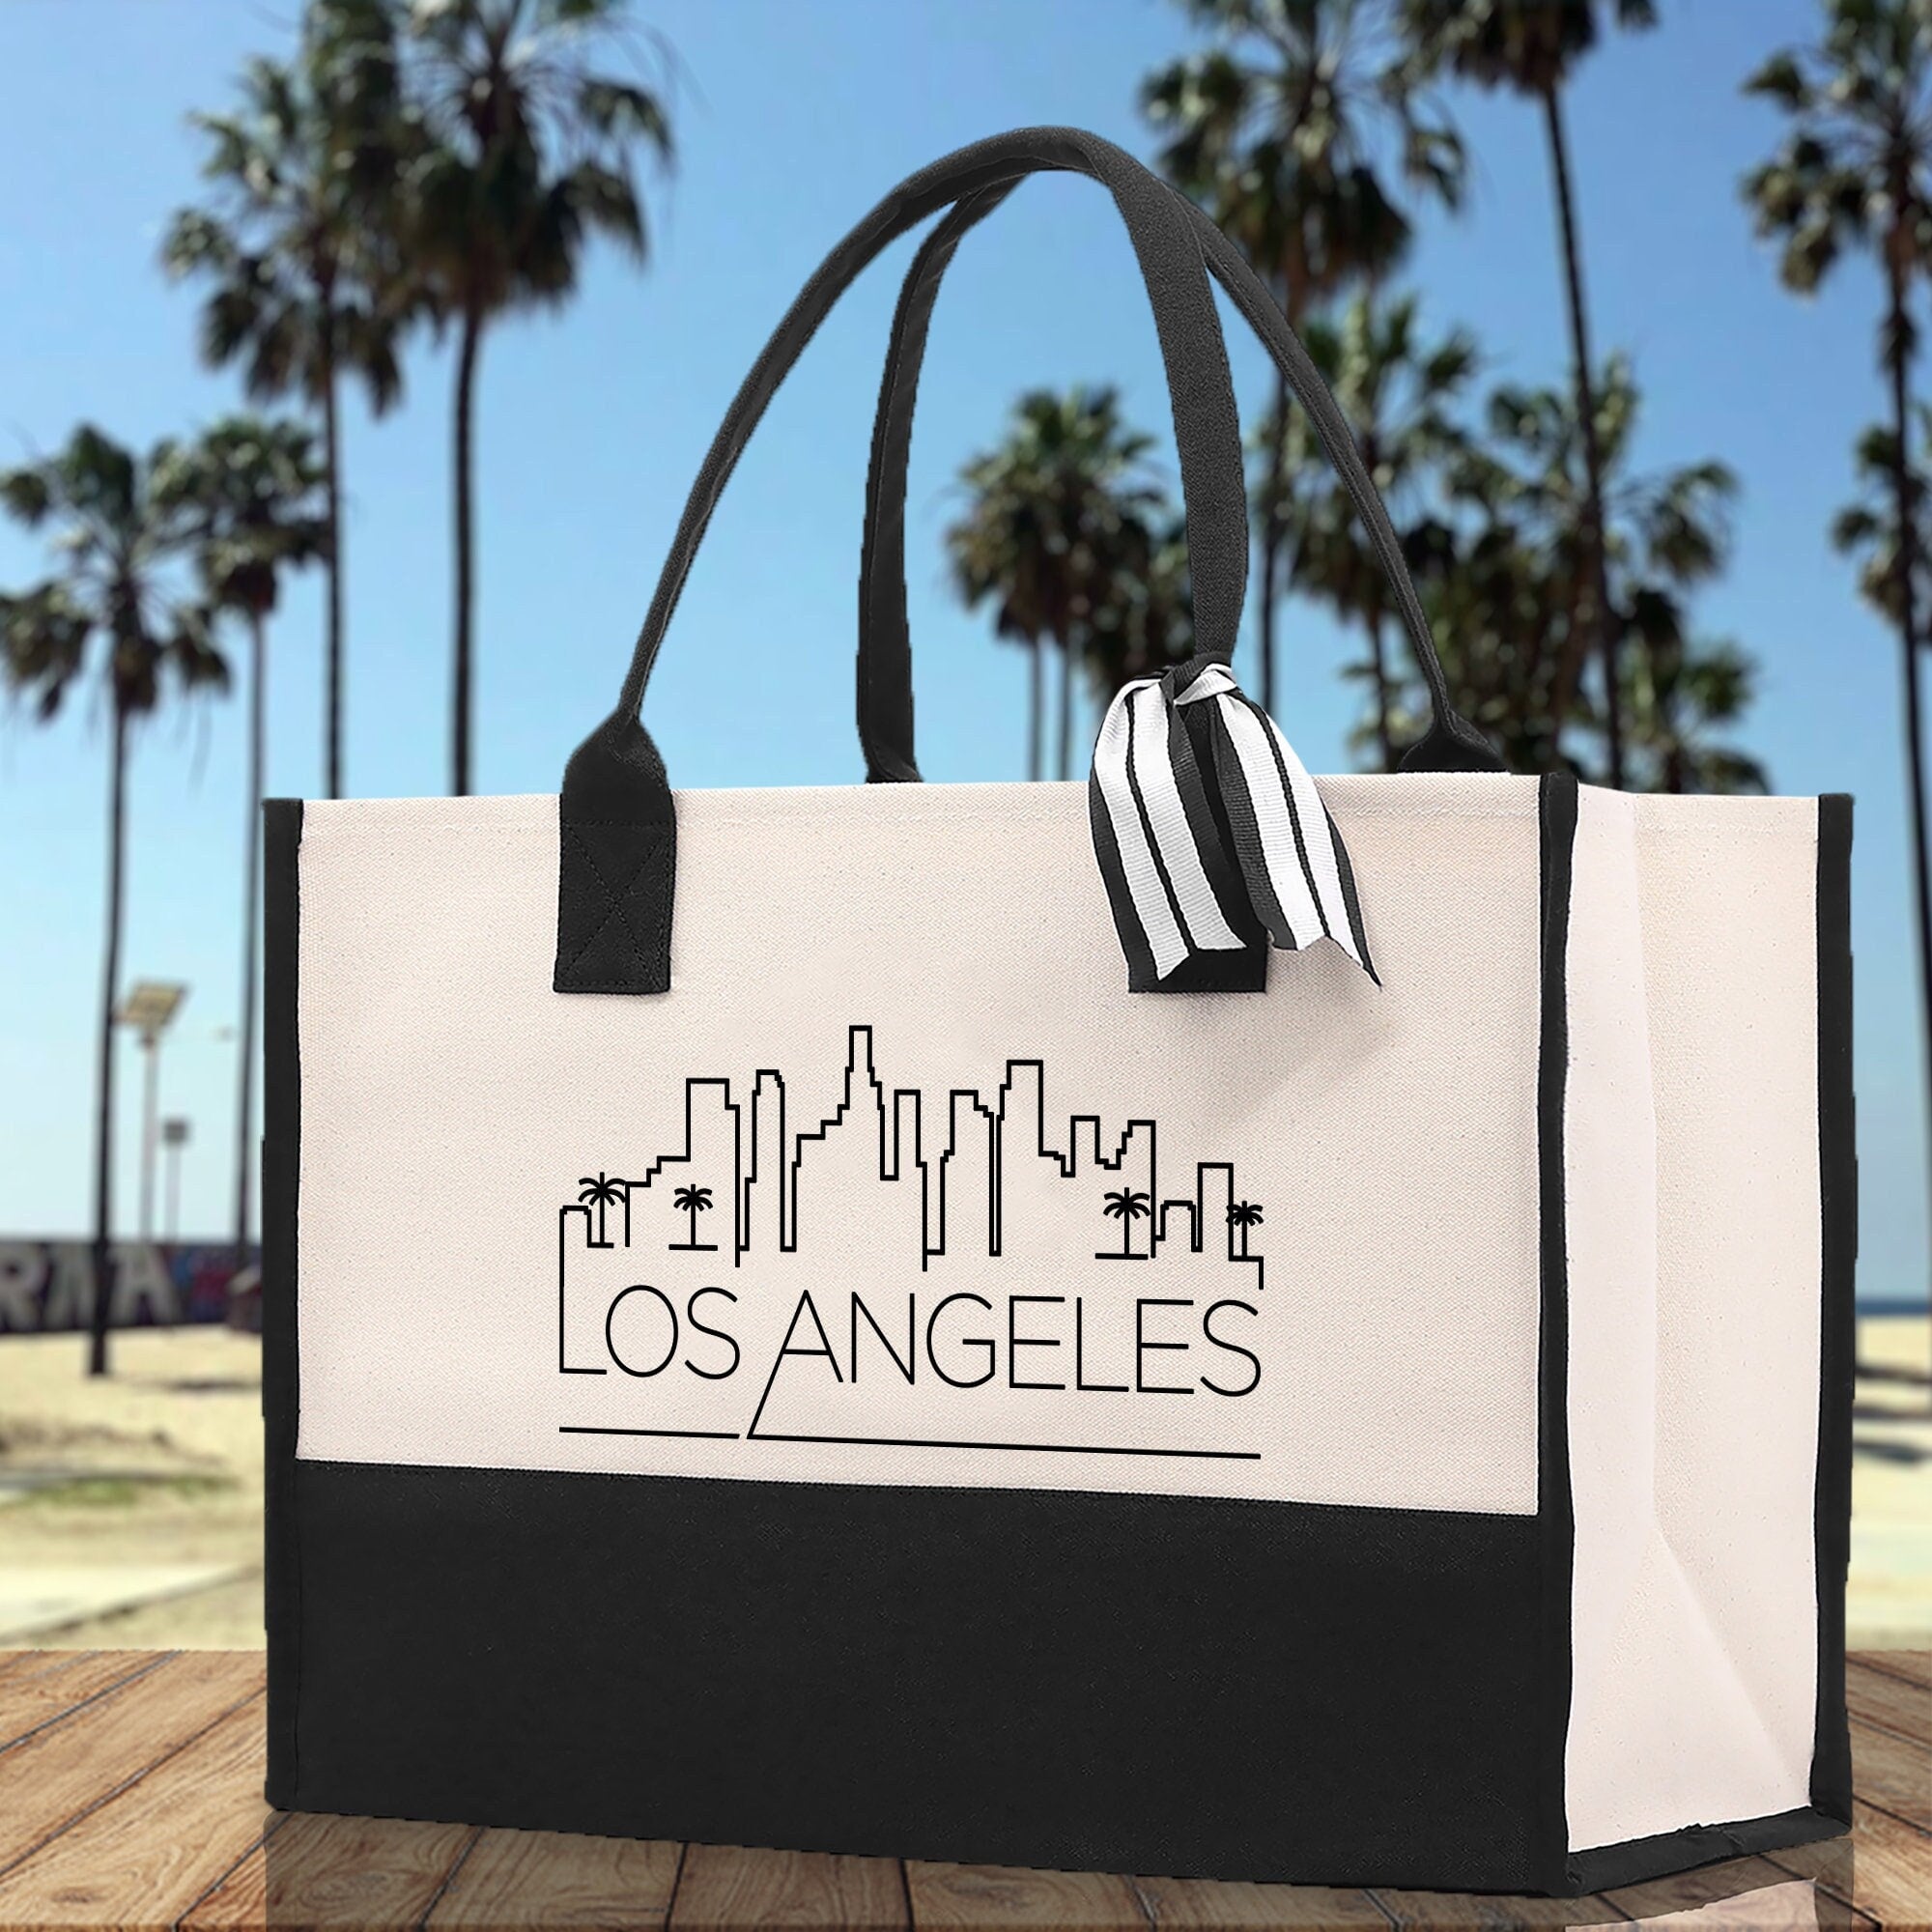 Los Angeles Cotton Canvas Tote Bag LA Travel Vacation Tote Employee and Client Gift Wedding Favor Birthday Welcome Tote Bag Bridesmaid Gift